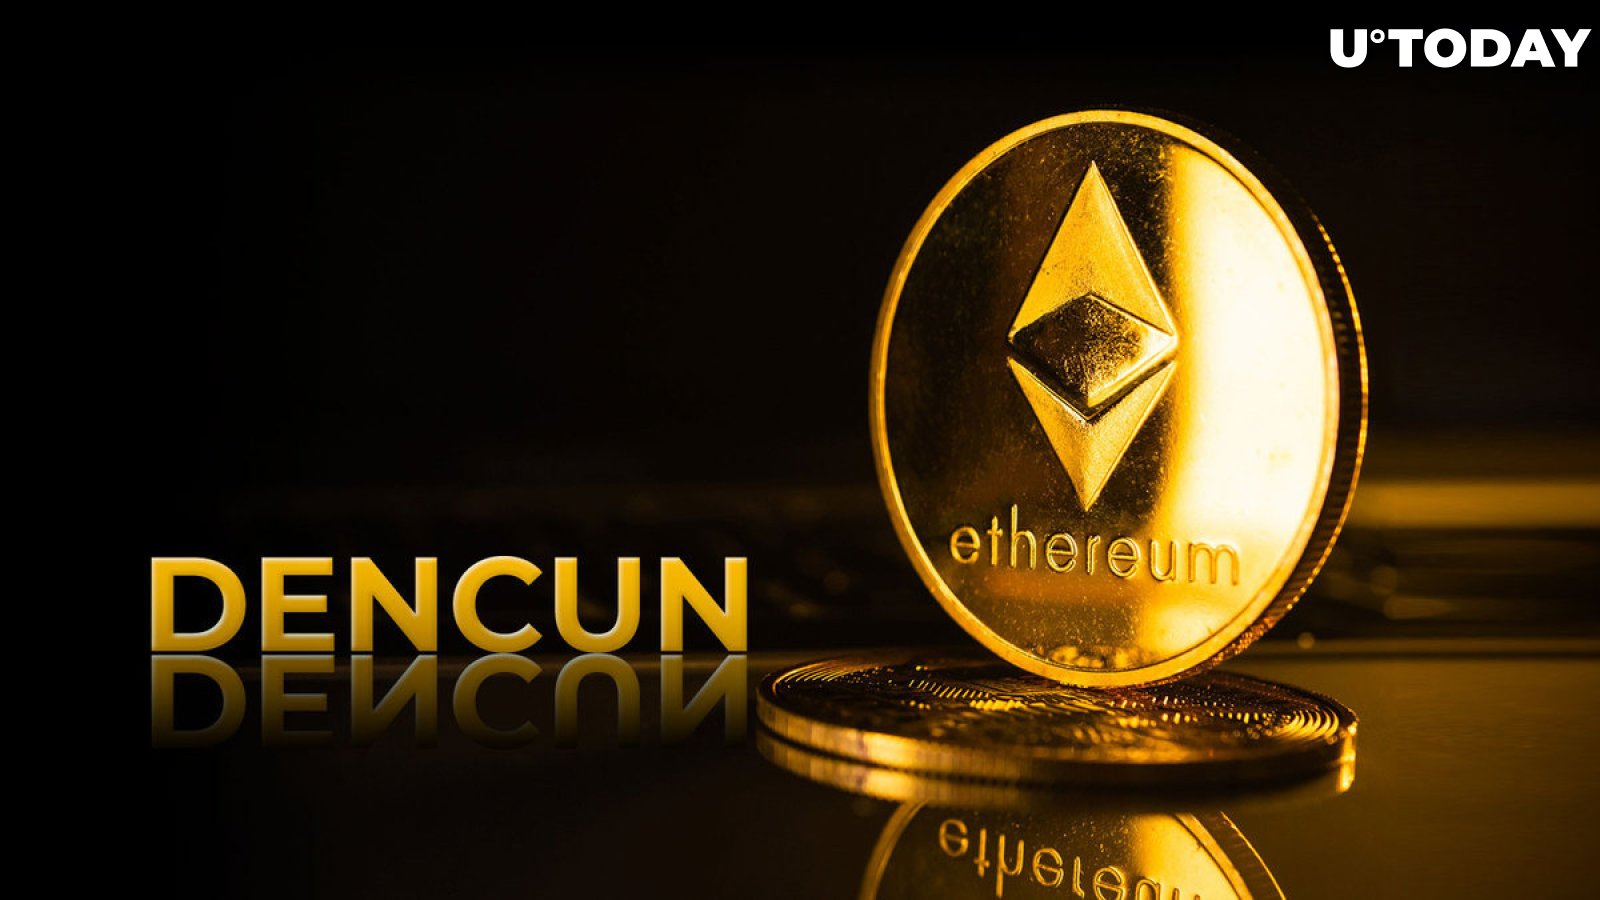 Ethereum loses deflationary status after Dencun upgrade, here's why